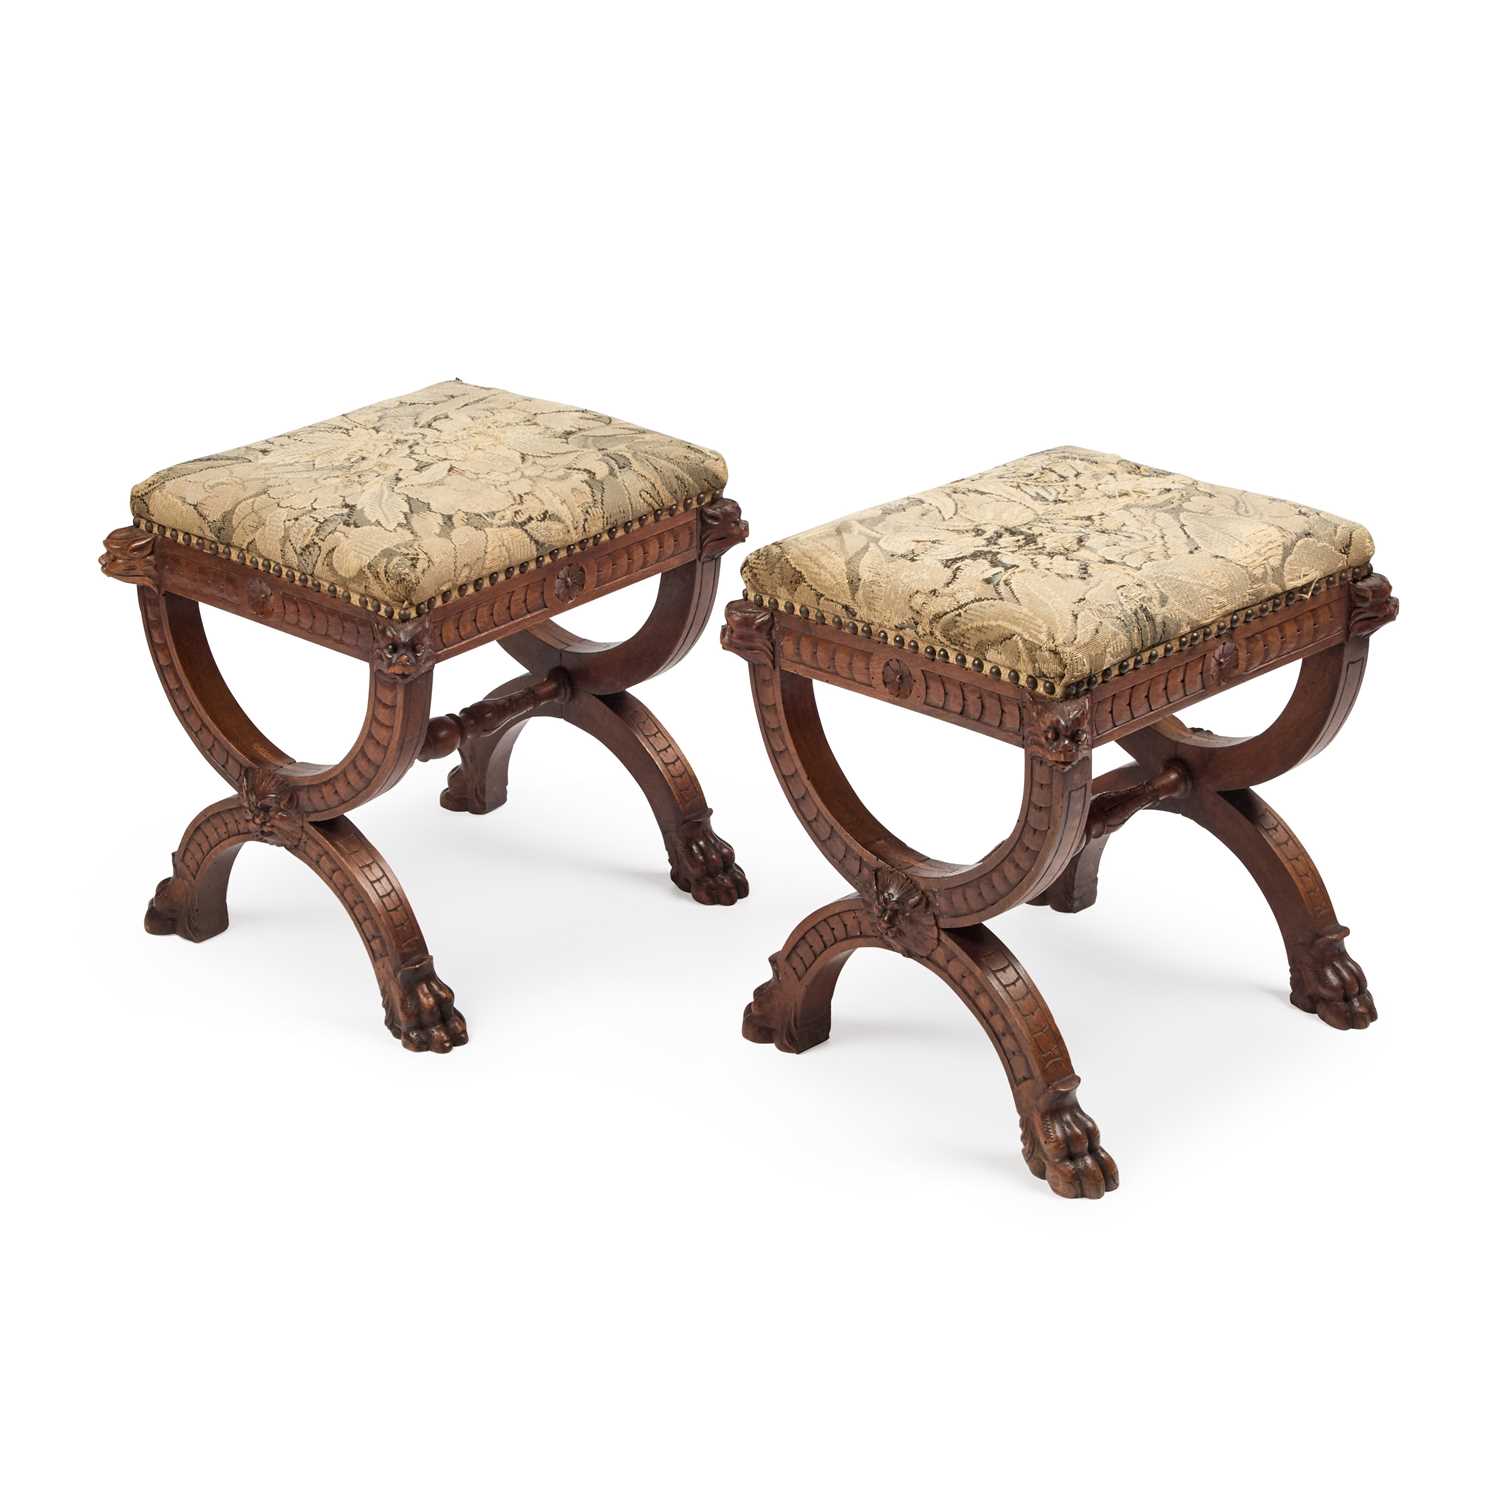 A PAIR OF VICTORIAN GOTHIC REVIVAL OAK AND UPHOLSTERED STOOLS